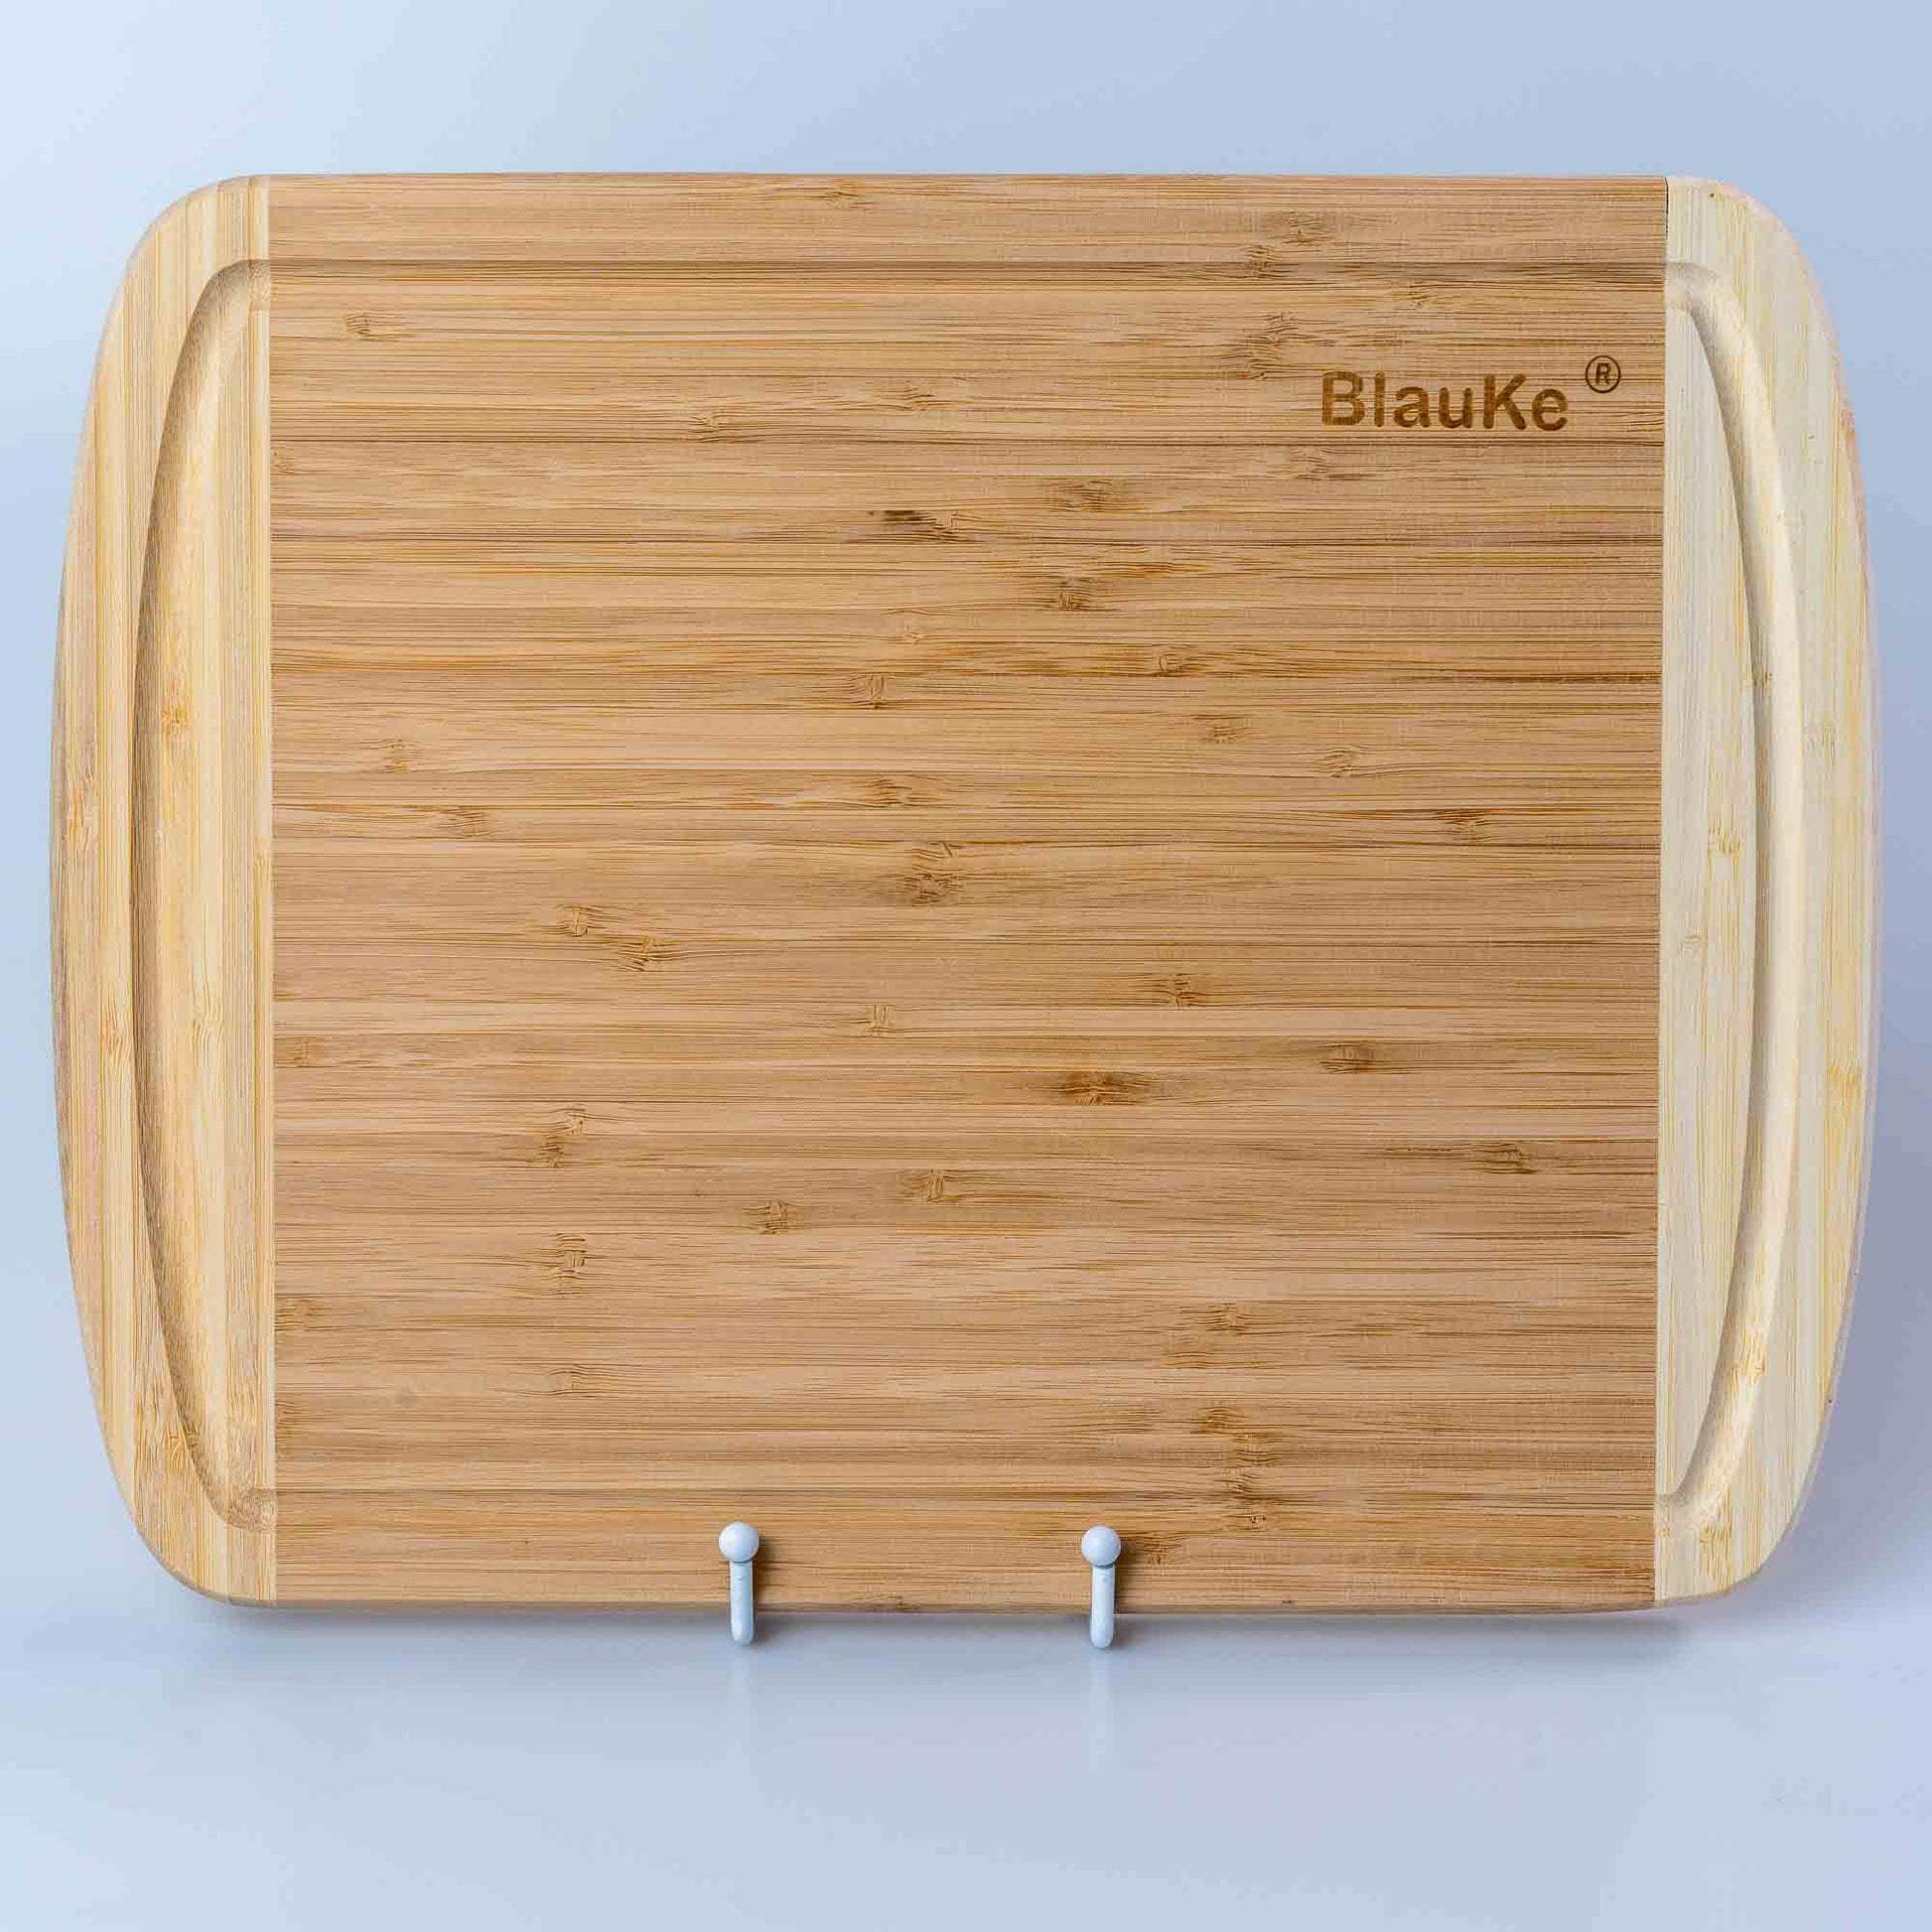 Large Wood Cutting Board for Kitchen 14x11 inch - Bamboo Chopping Board with Juice Groove - Wooden Serving Tray-10